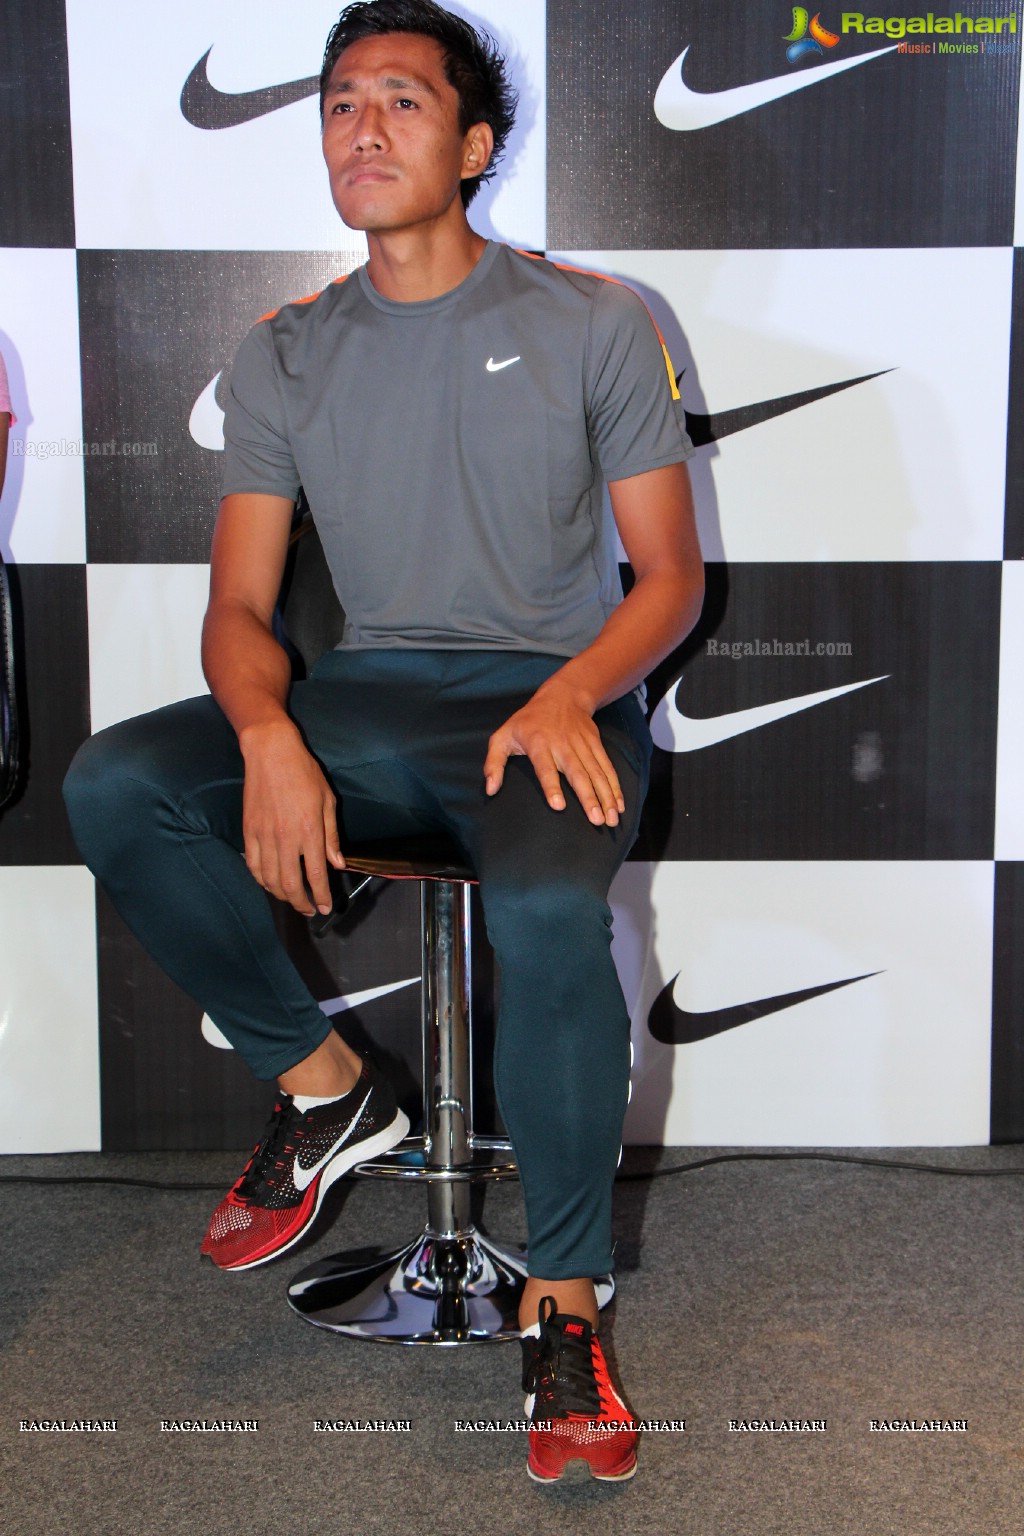 Nike Jubilee Hills Stores Launch